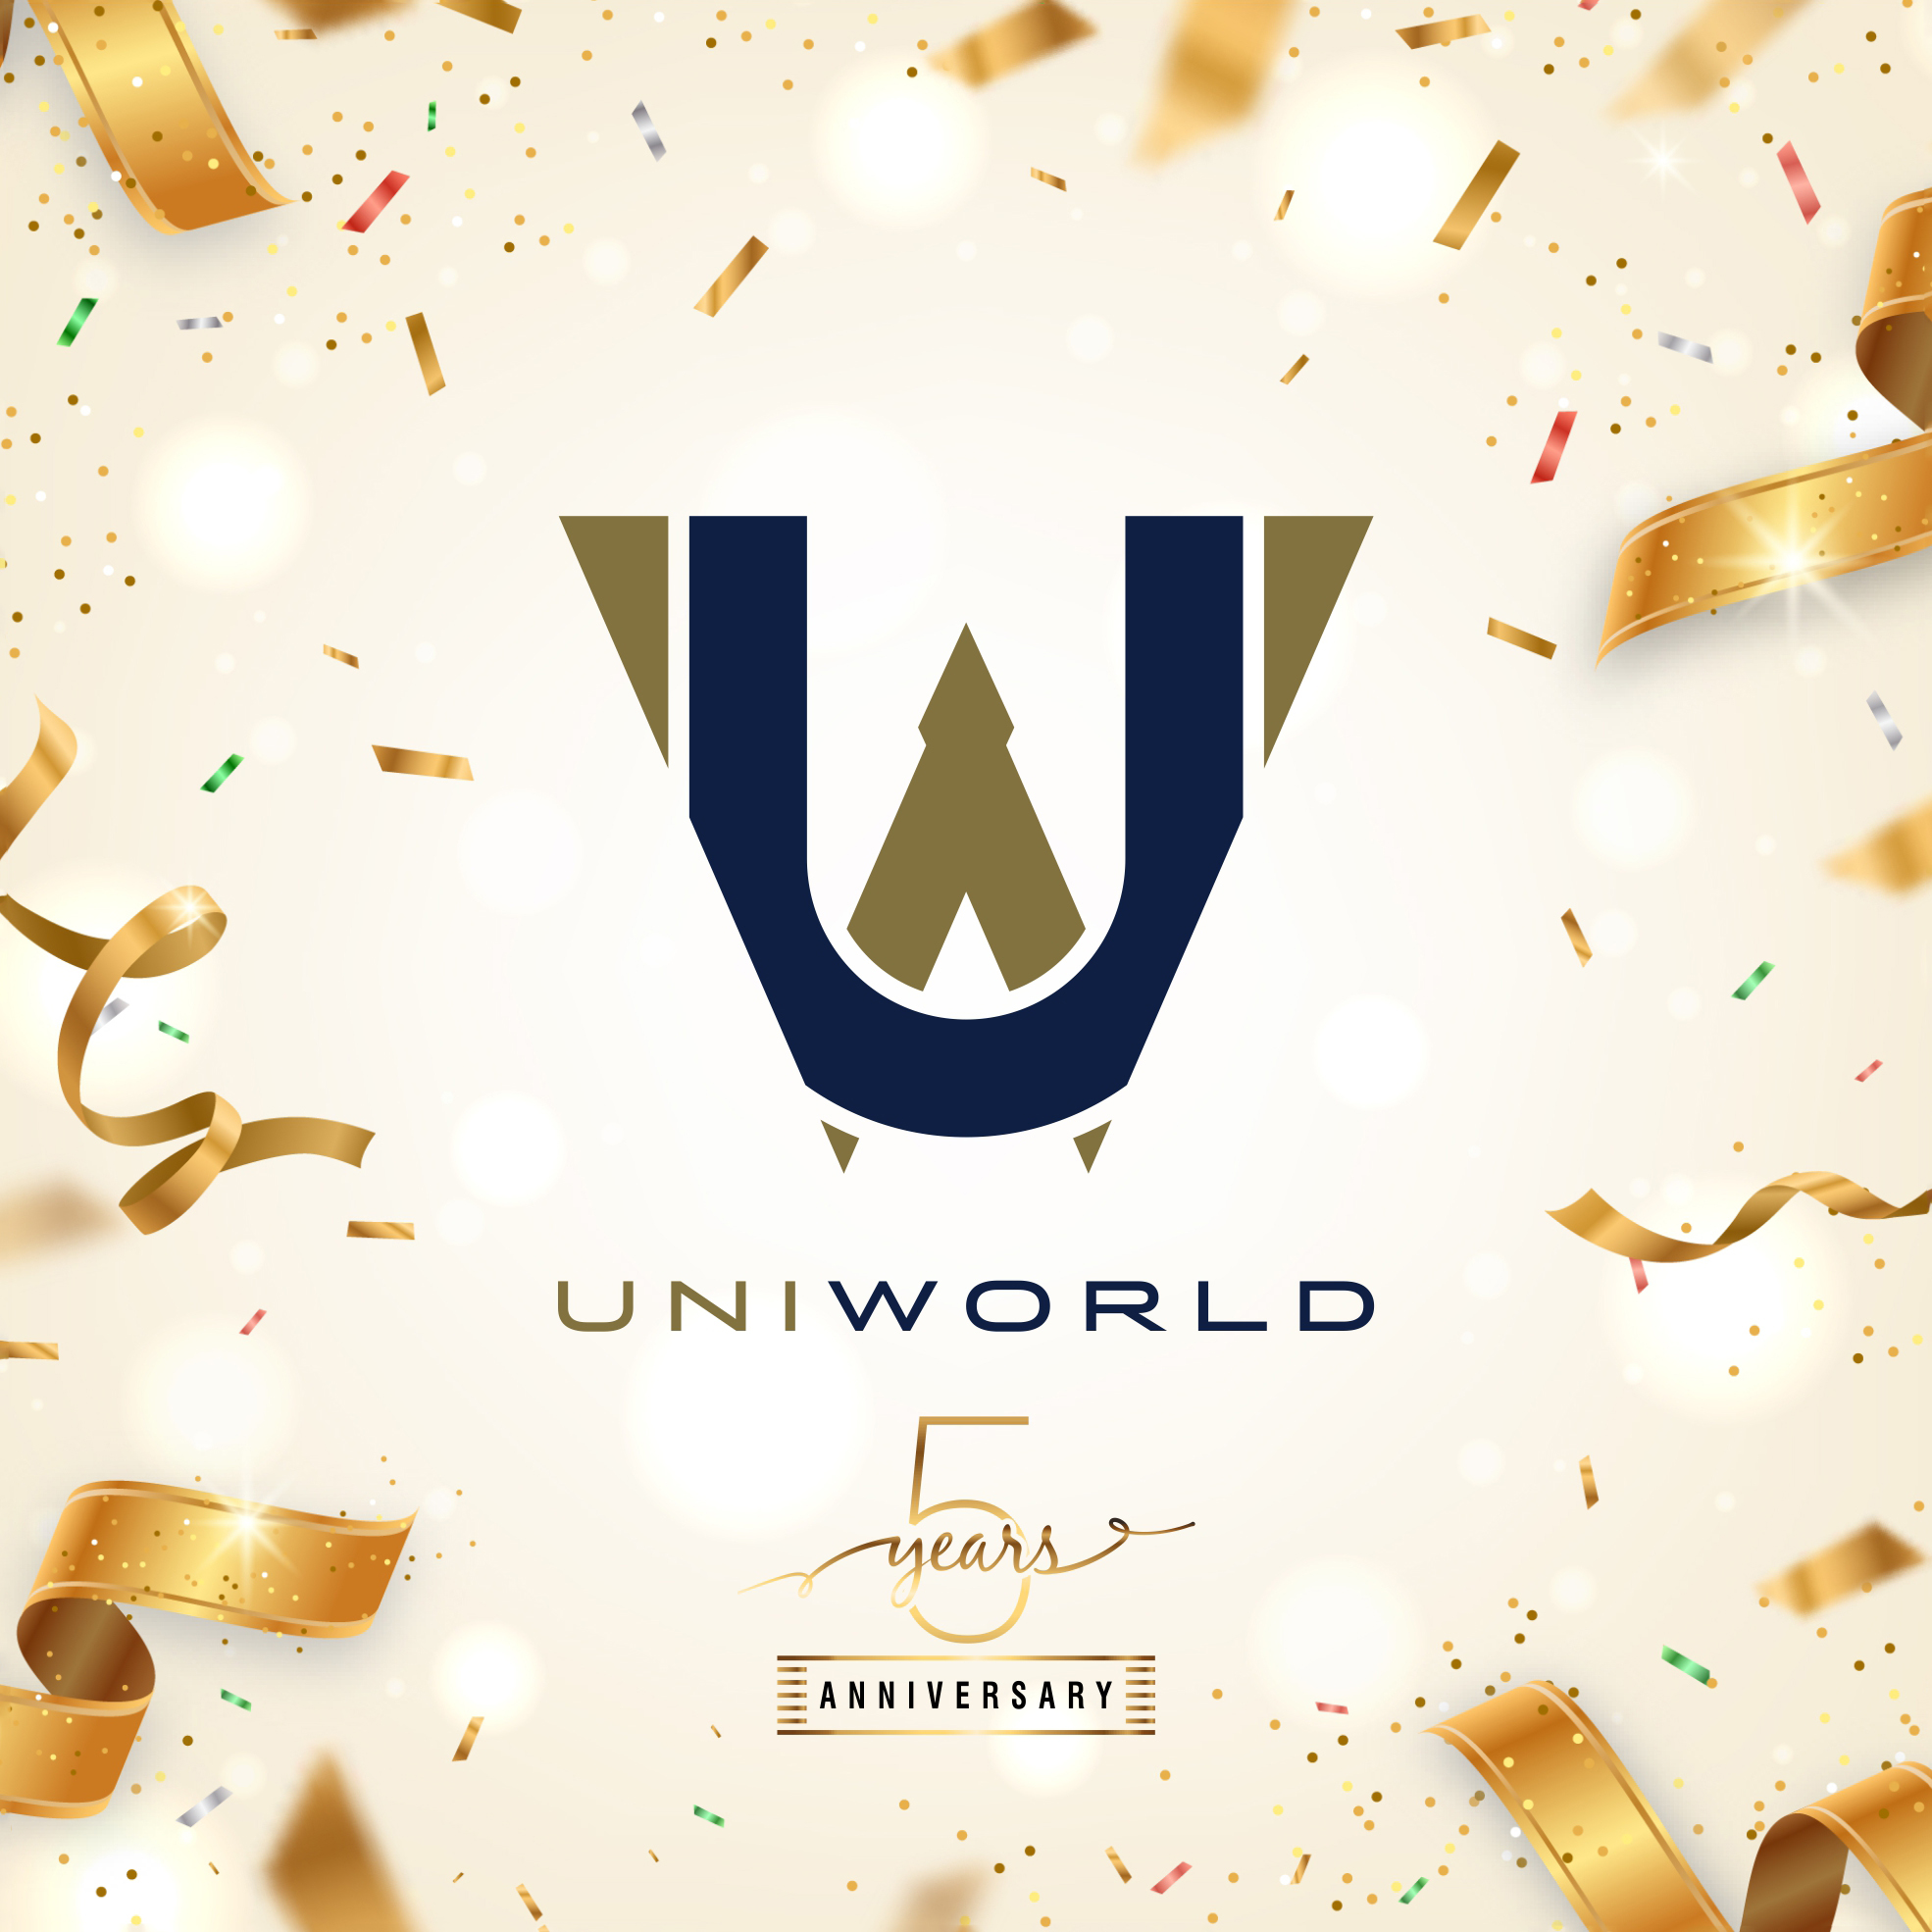 UNIWORLD STUDIOS REVEAL NEW BRAND IDENTITY WITH A REDESIGNED LOGO